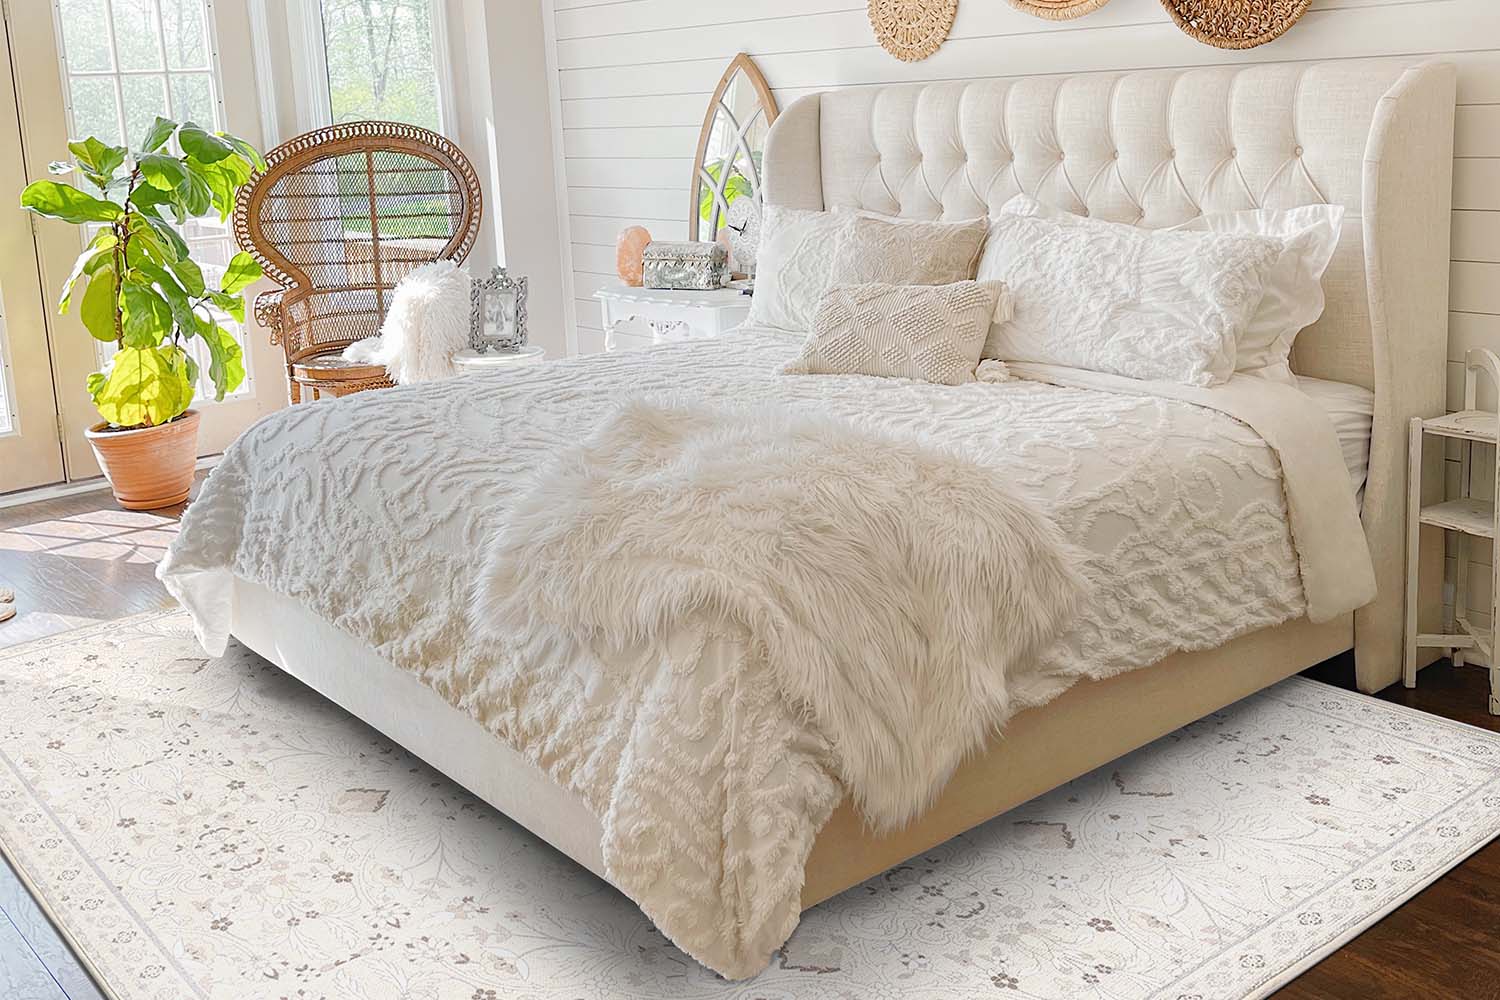 Area Rug Placement and Rug Sizes Under Queen Bed